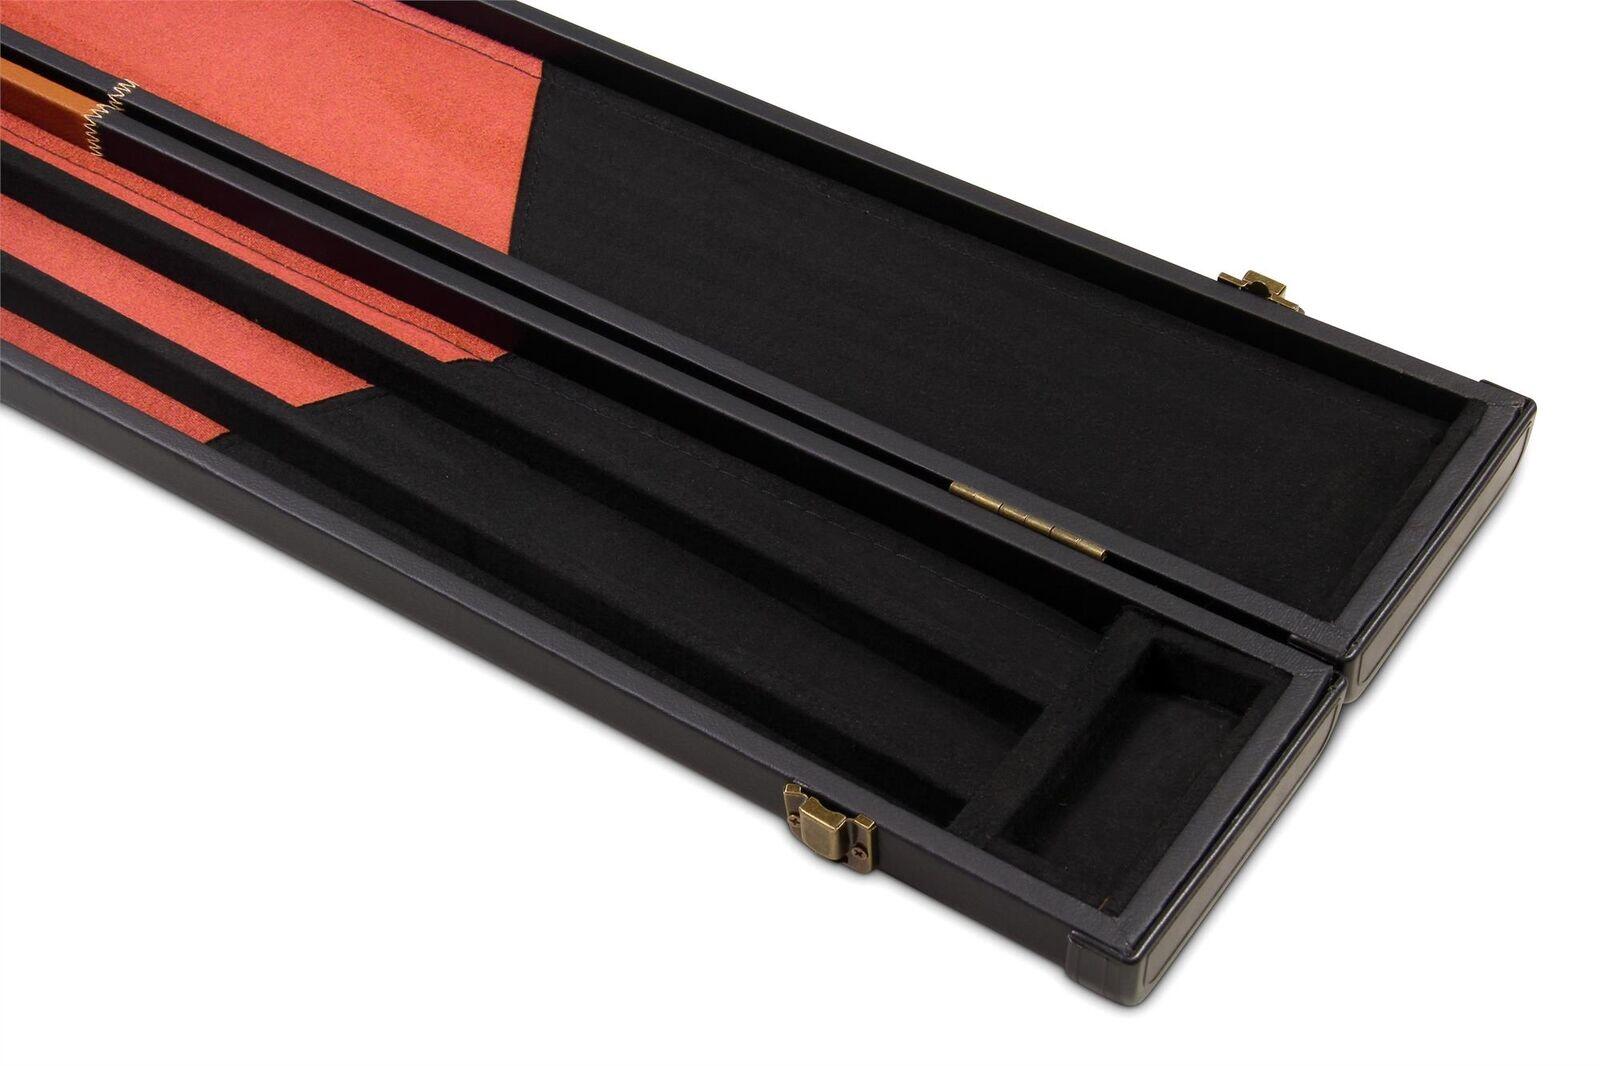 Deluxe 1 Piece WIDE ORANGE CHEQUERED Snooker Pool Cue Case - Holds 3 Cues 4/7